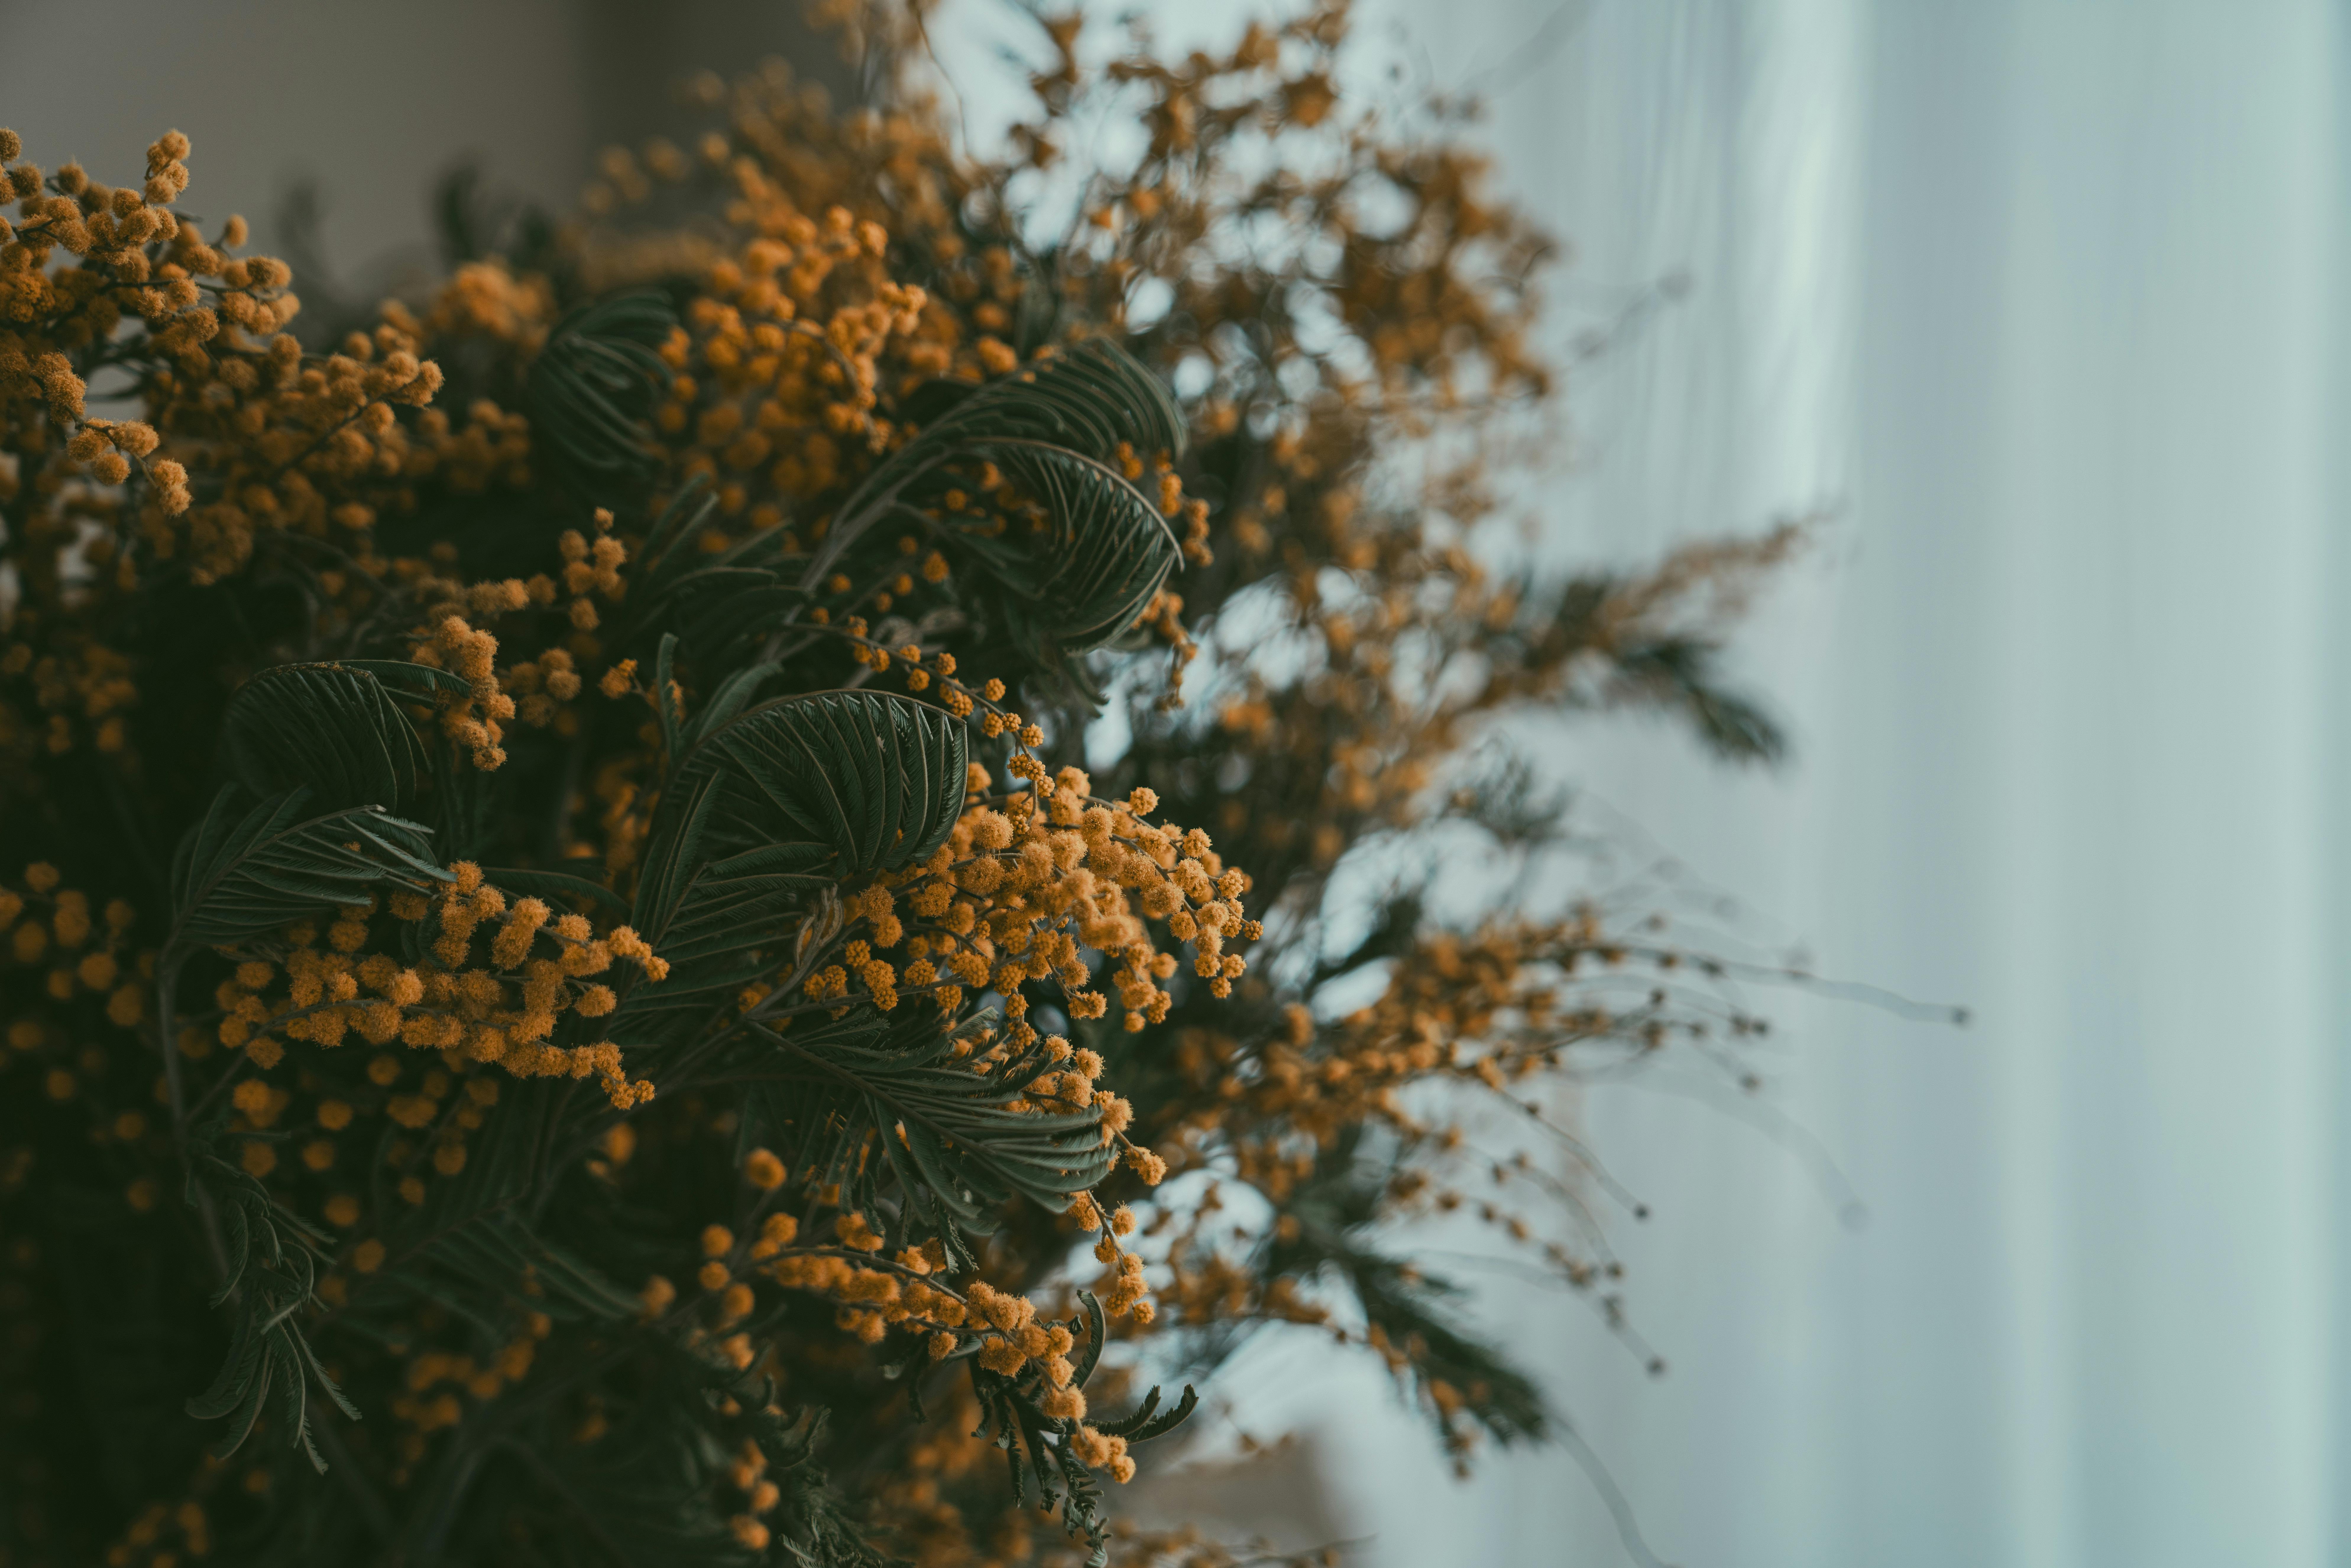 A close up of some dried plants with some white flowers · Free Stock